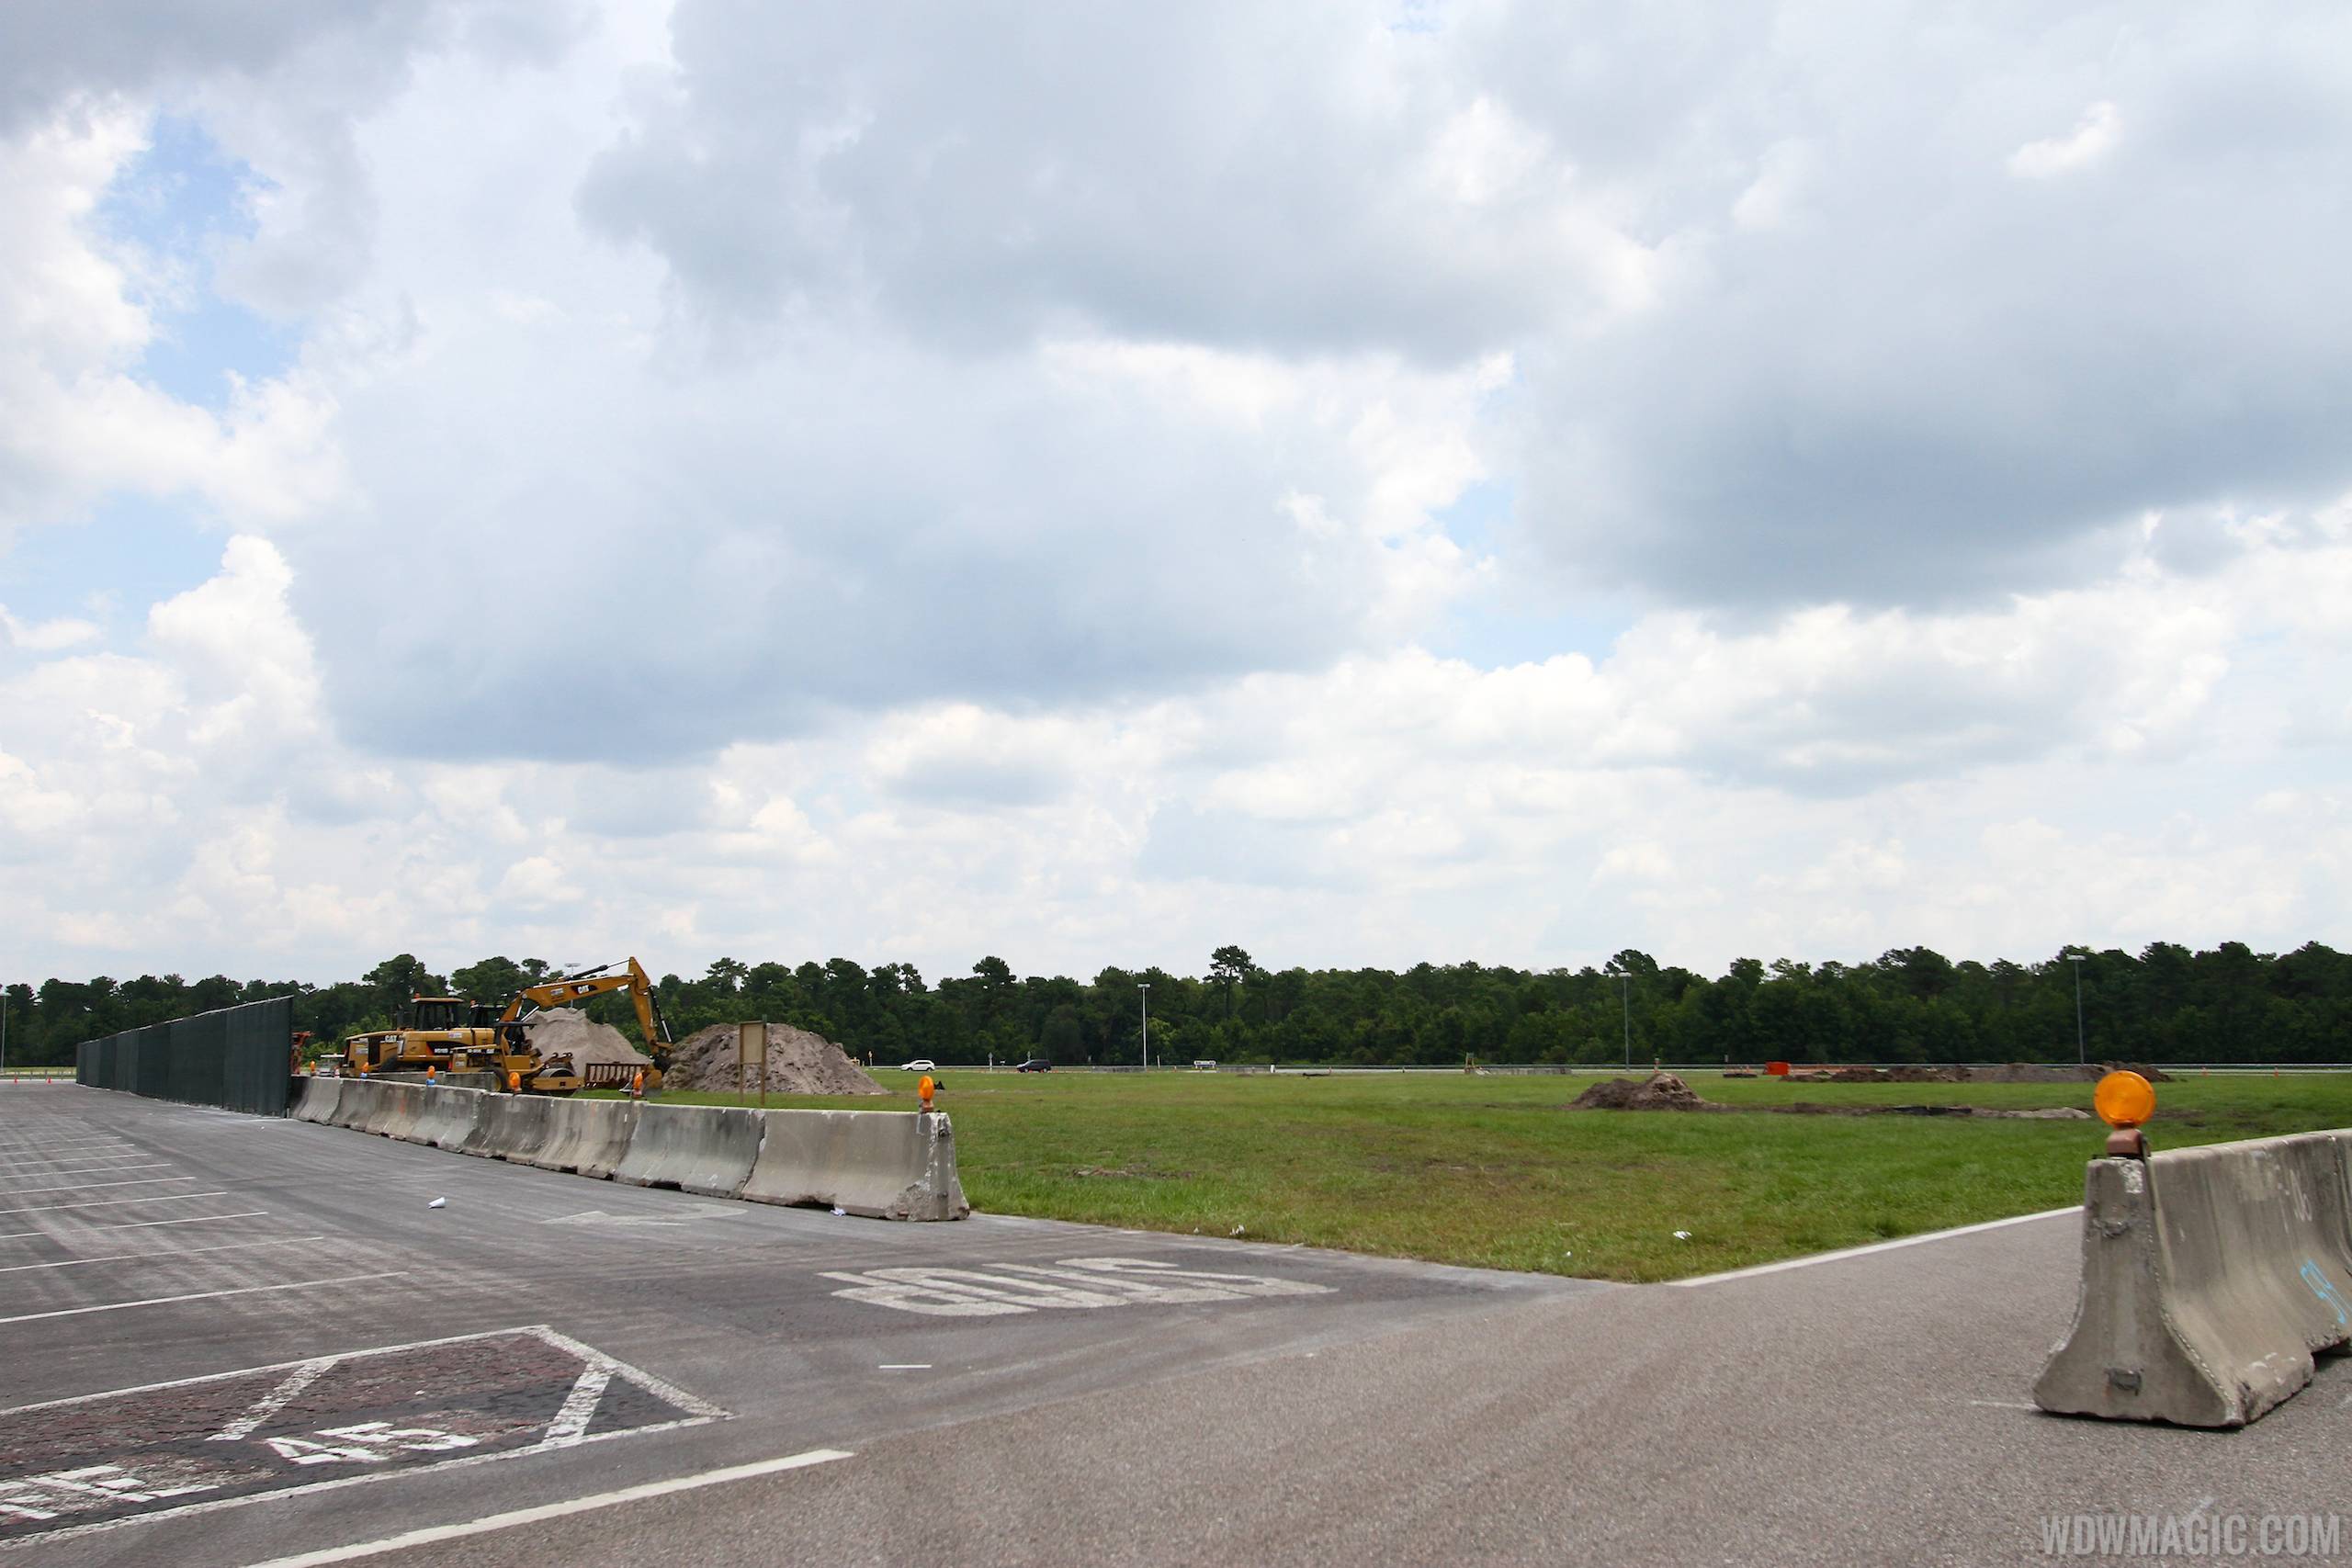 PHOTOS - New Yeti parking lot section at Disney's Animal Kingdom now under construction